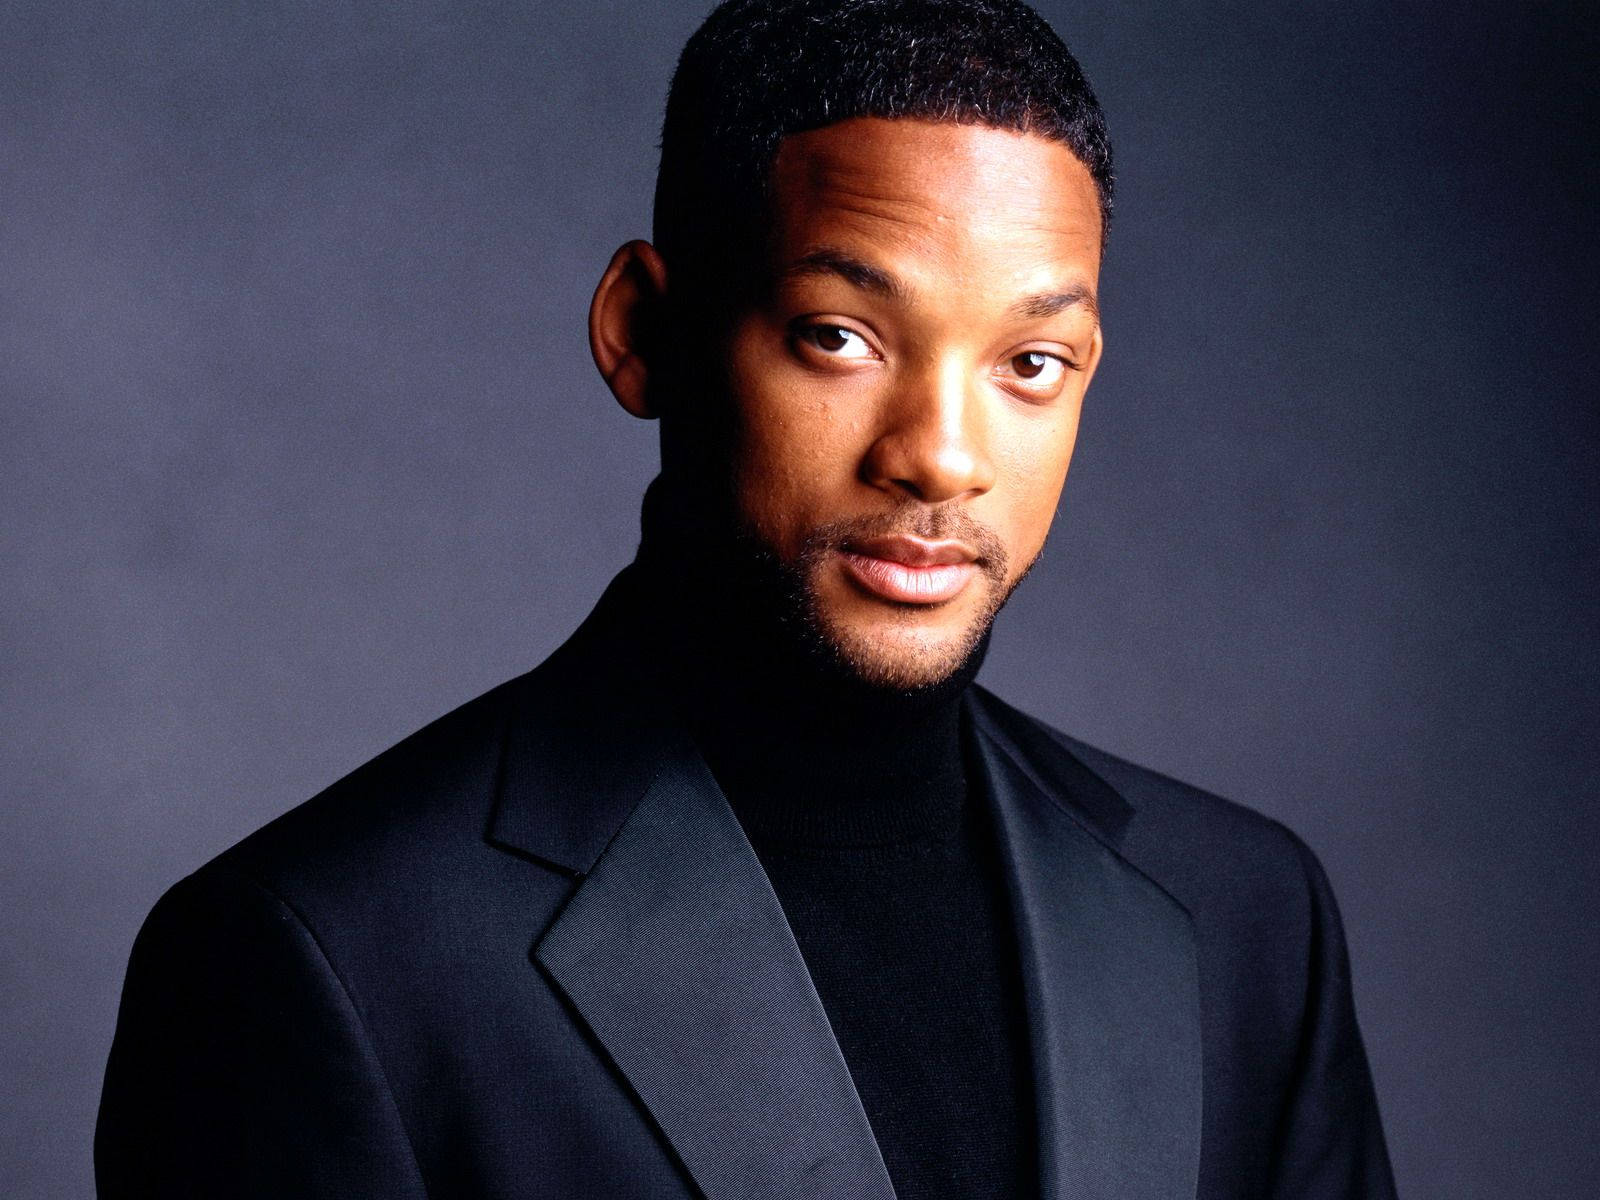 Will Smith In All Black Suit Background